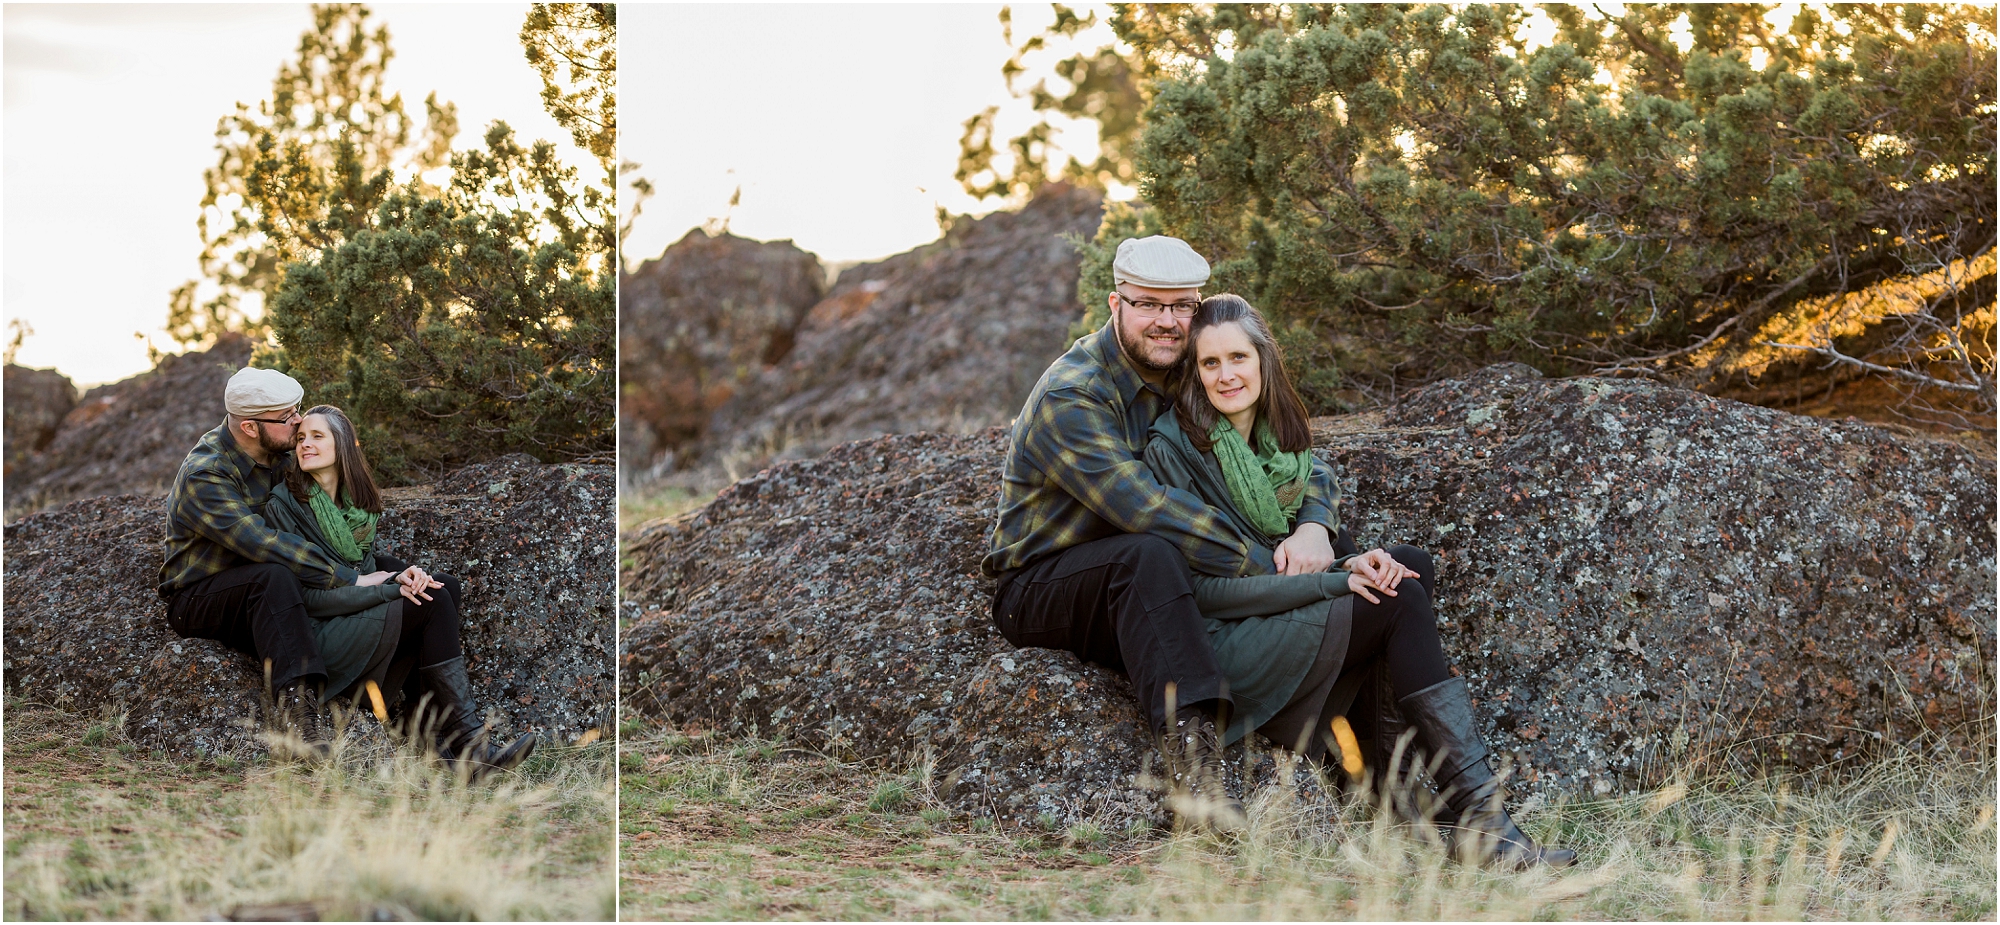 The Crooked River Grasslands near Bend Oregon are a beautiful location for an outdoor engagement session by Bend Oregon wedding photographer Erica Swantek Photography. 